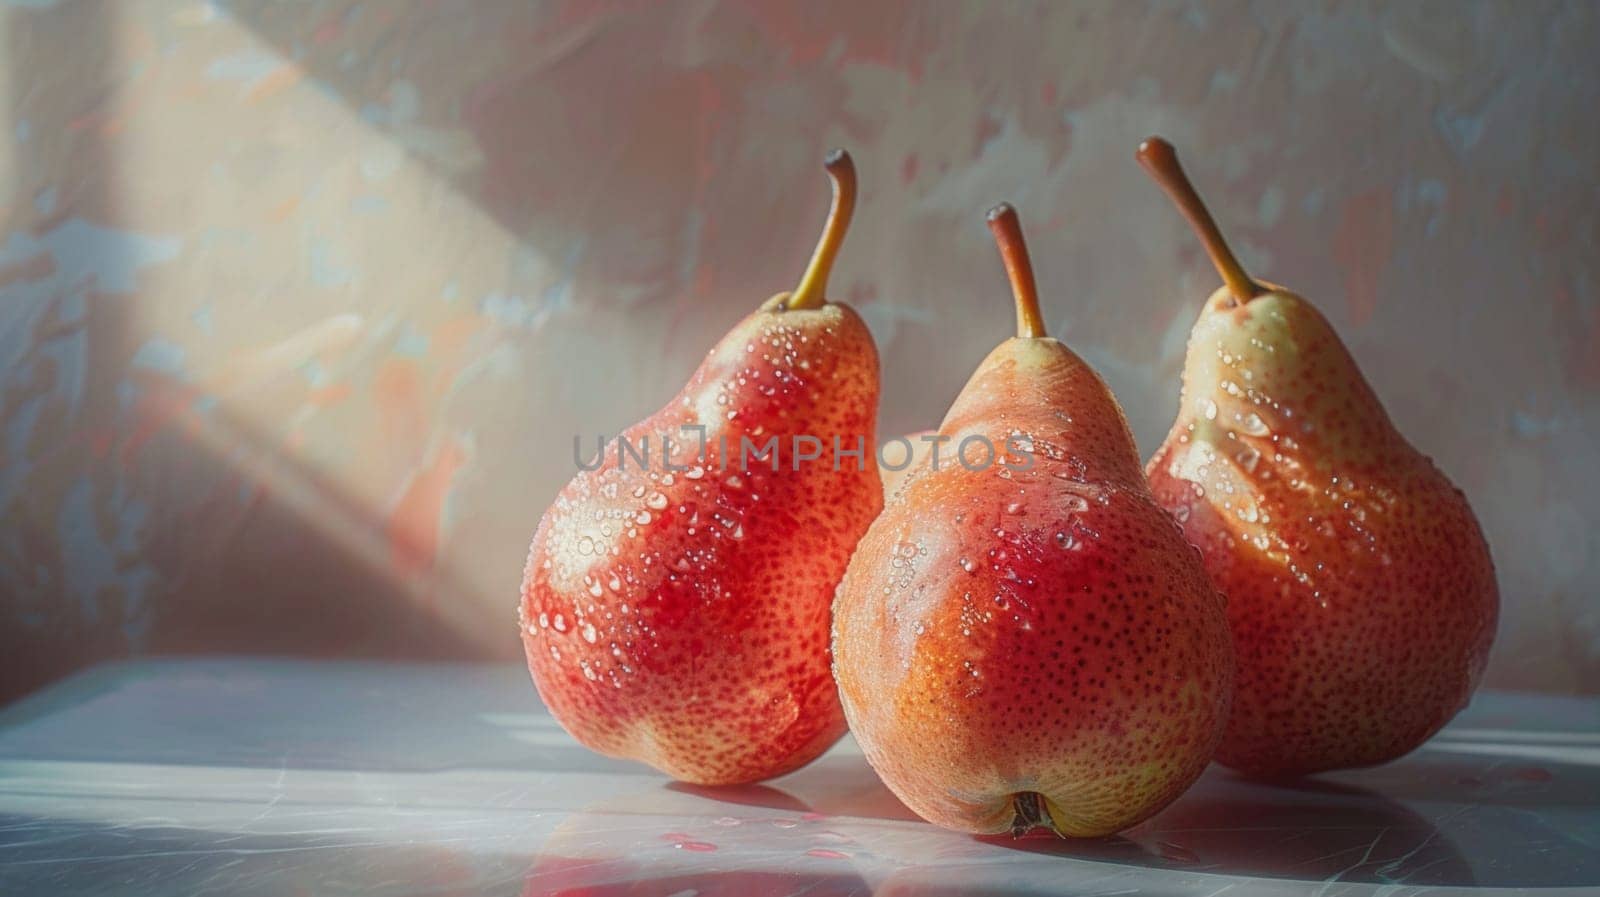 Three pears are sitting on a table with water droplets, AI by starush